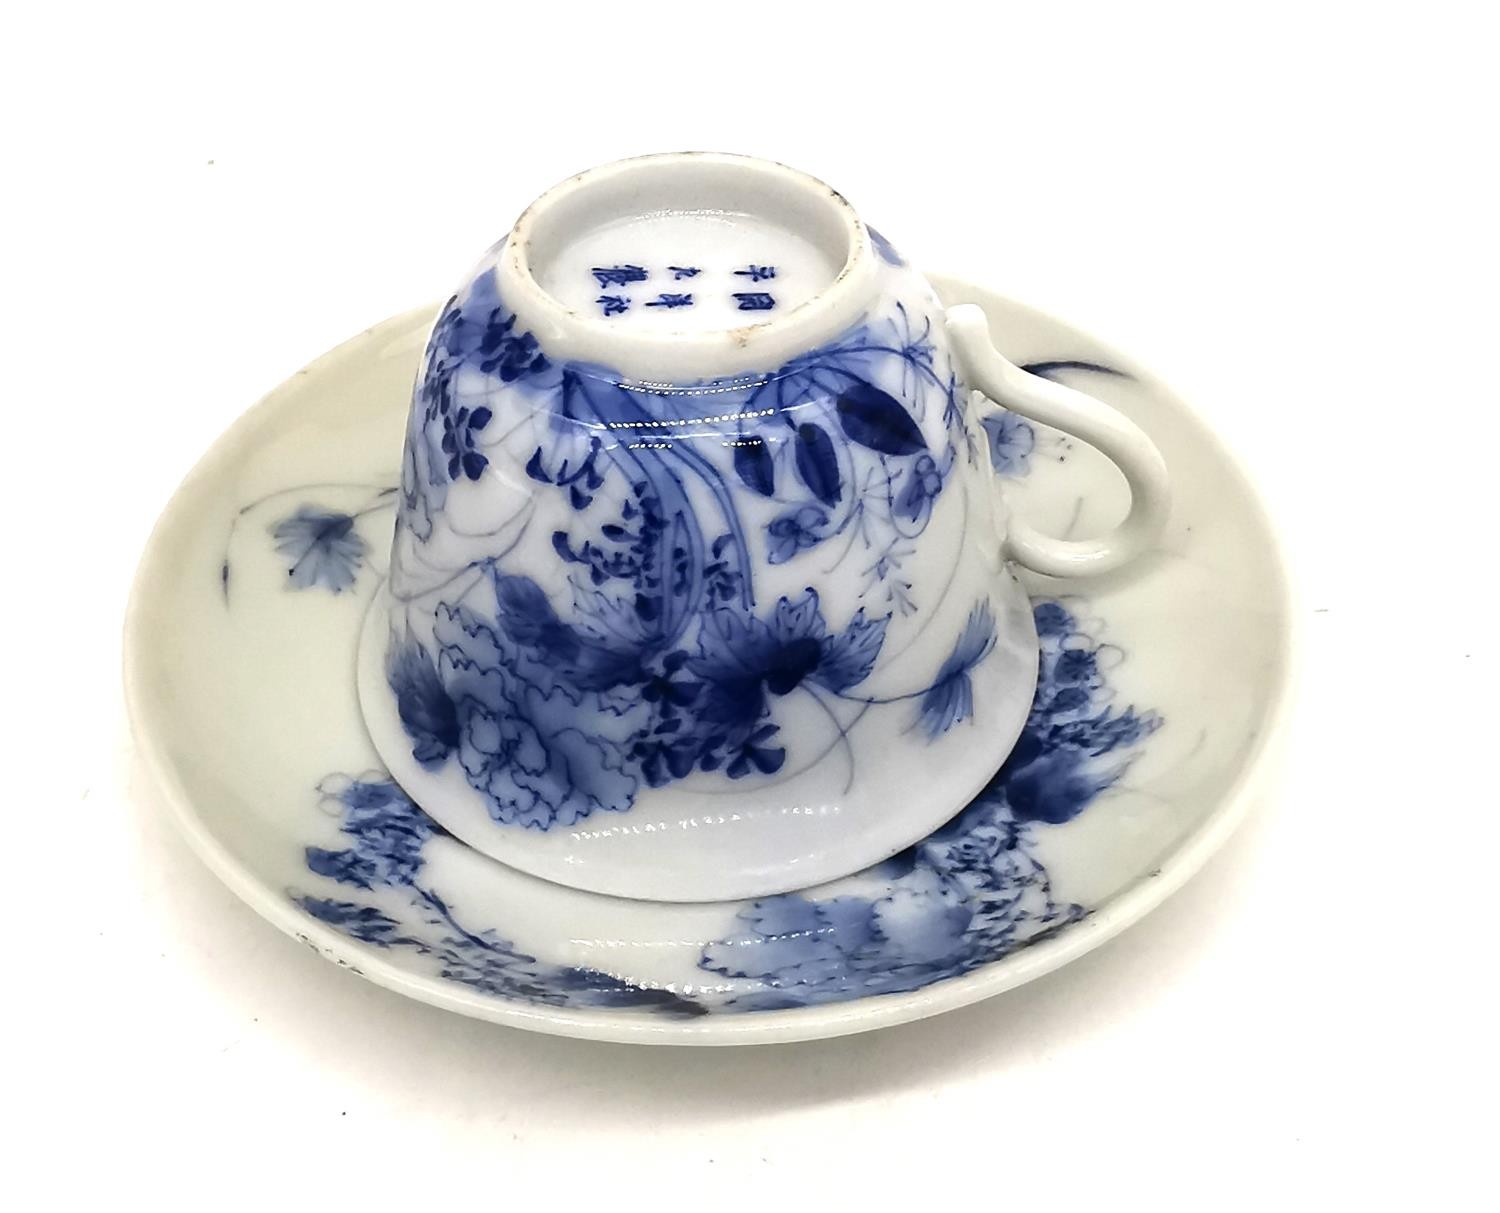 A Japanese 19th century hand painted porcelain small blue and white floral and foliate design teacup - Image 7 of 9